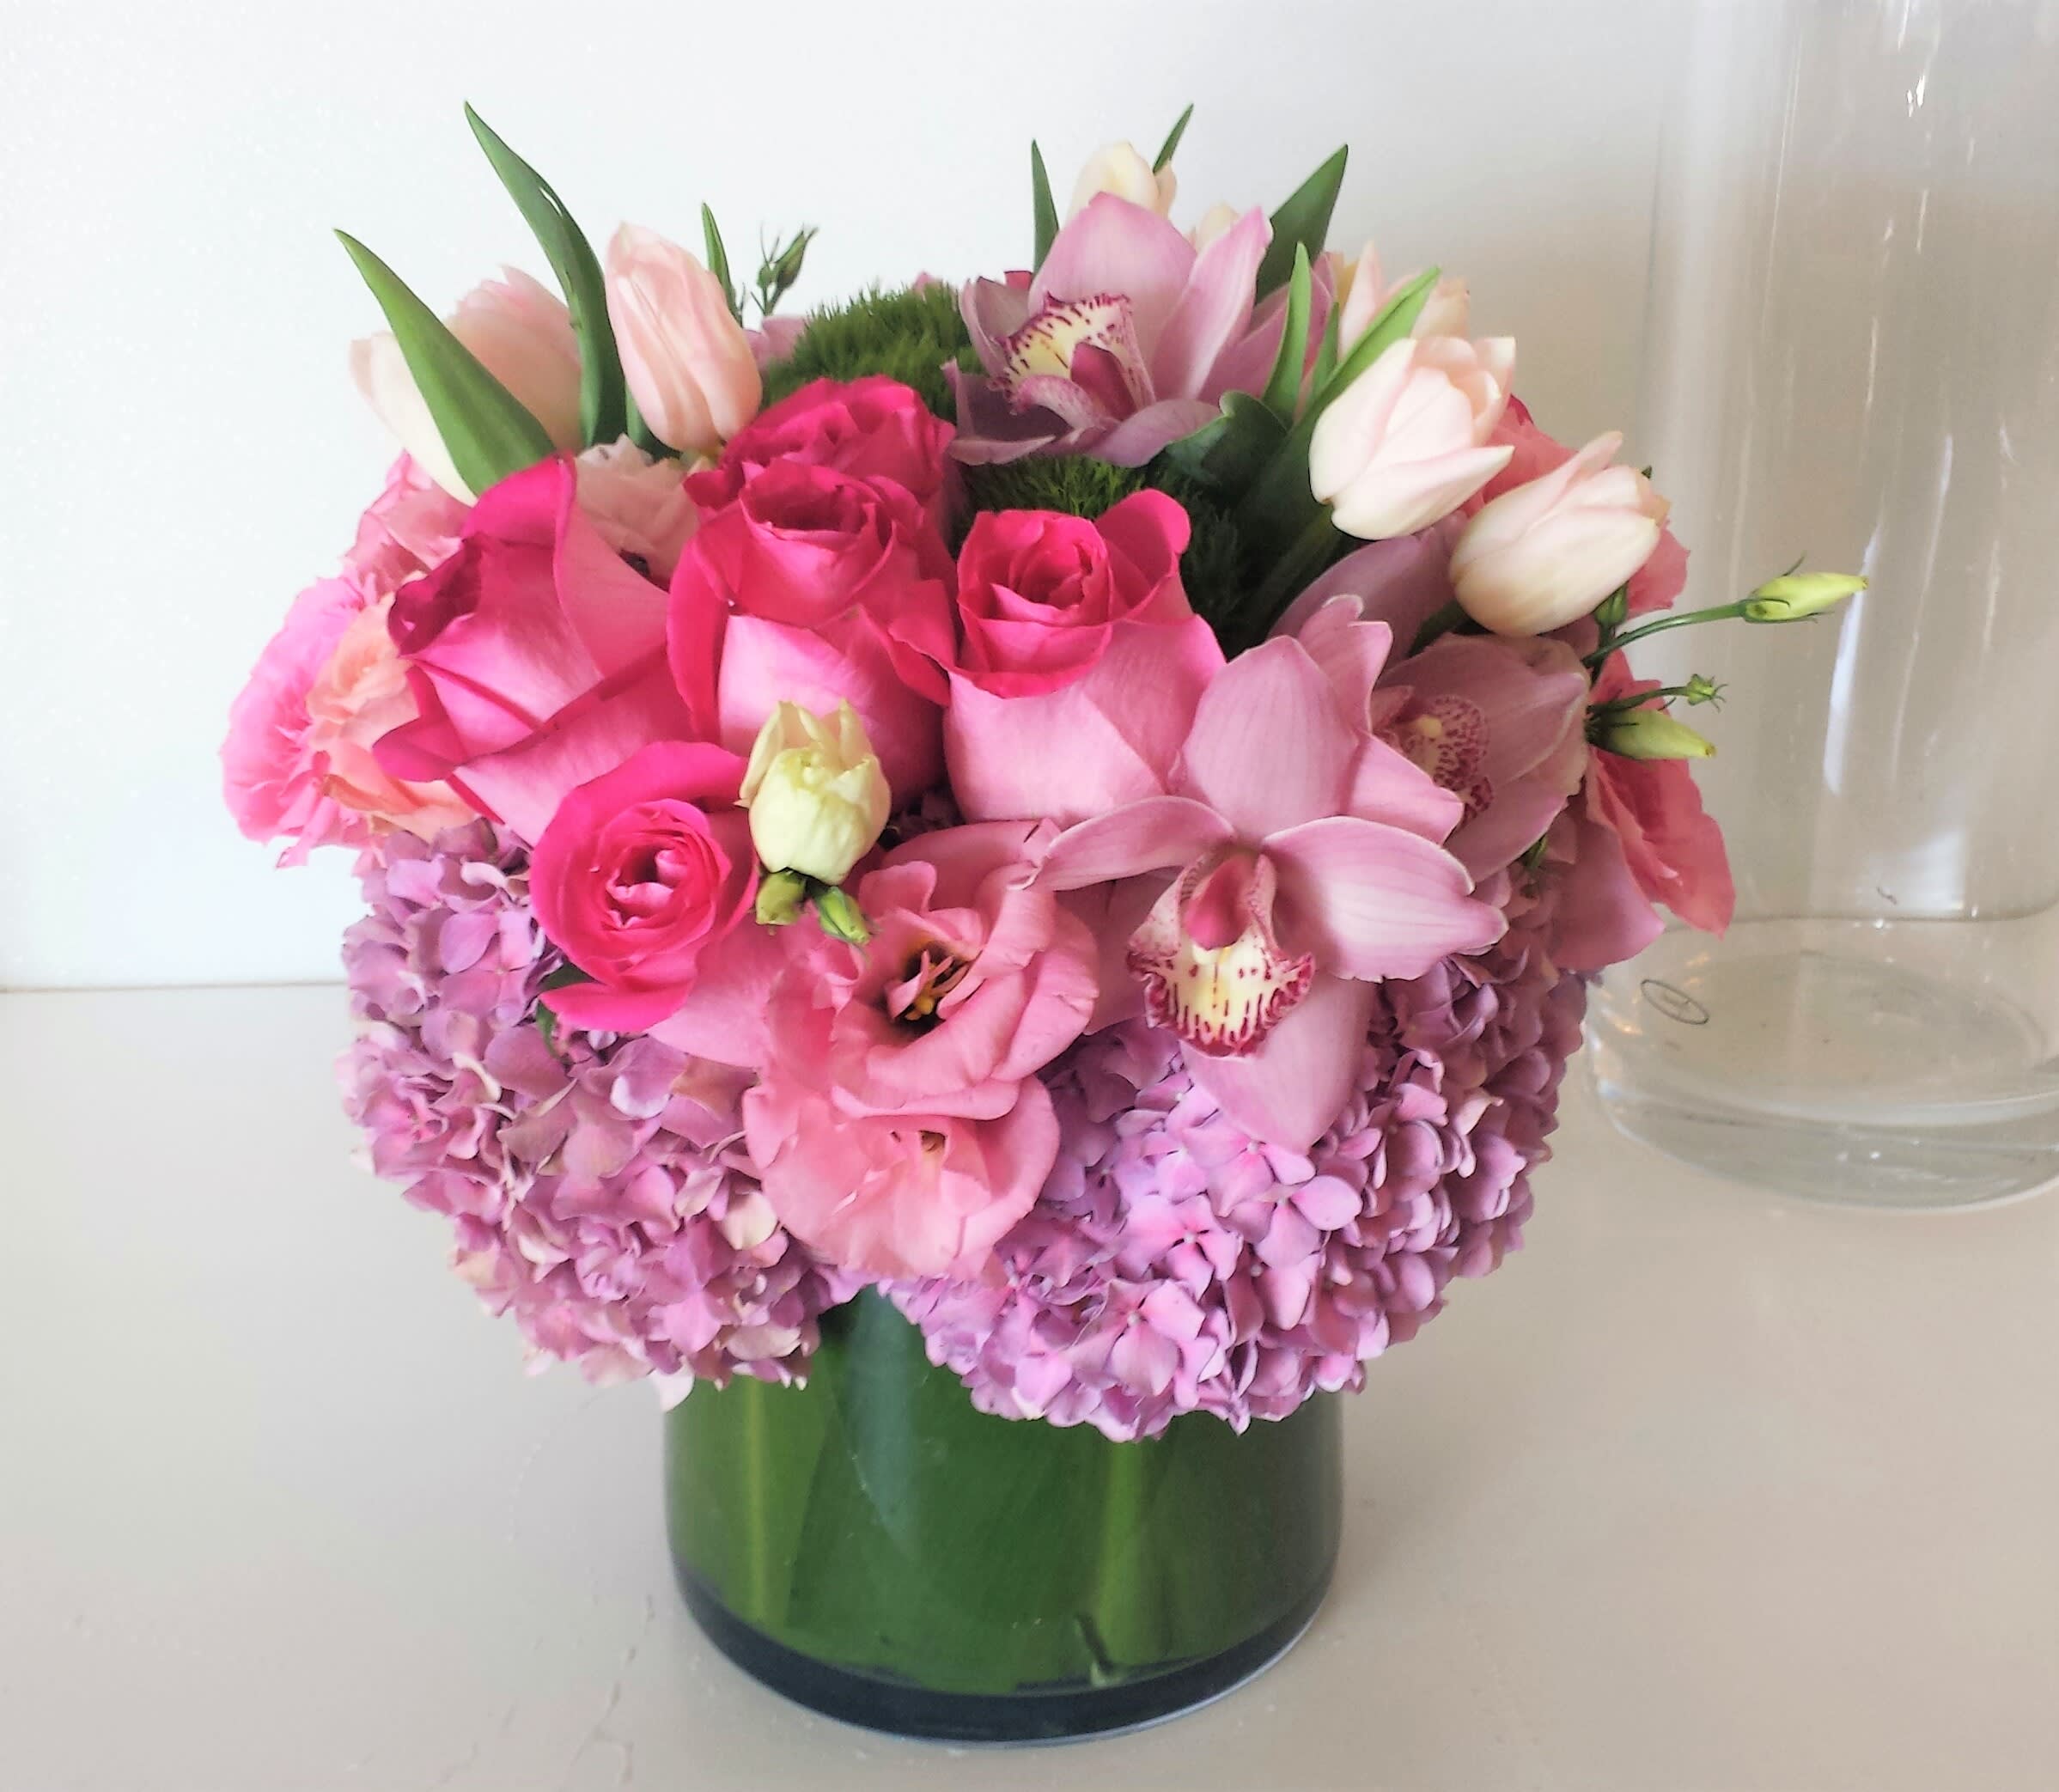 Popular Pinks - Beautiful display of all pinks popular blooms like hydrangeas, roses, tulips and orchids.  This design is all around in a low cylinder vase.